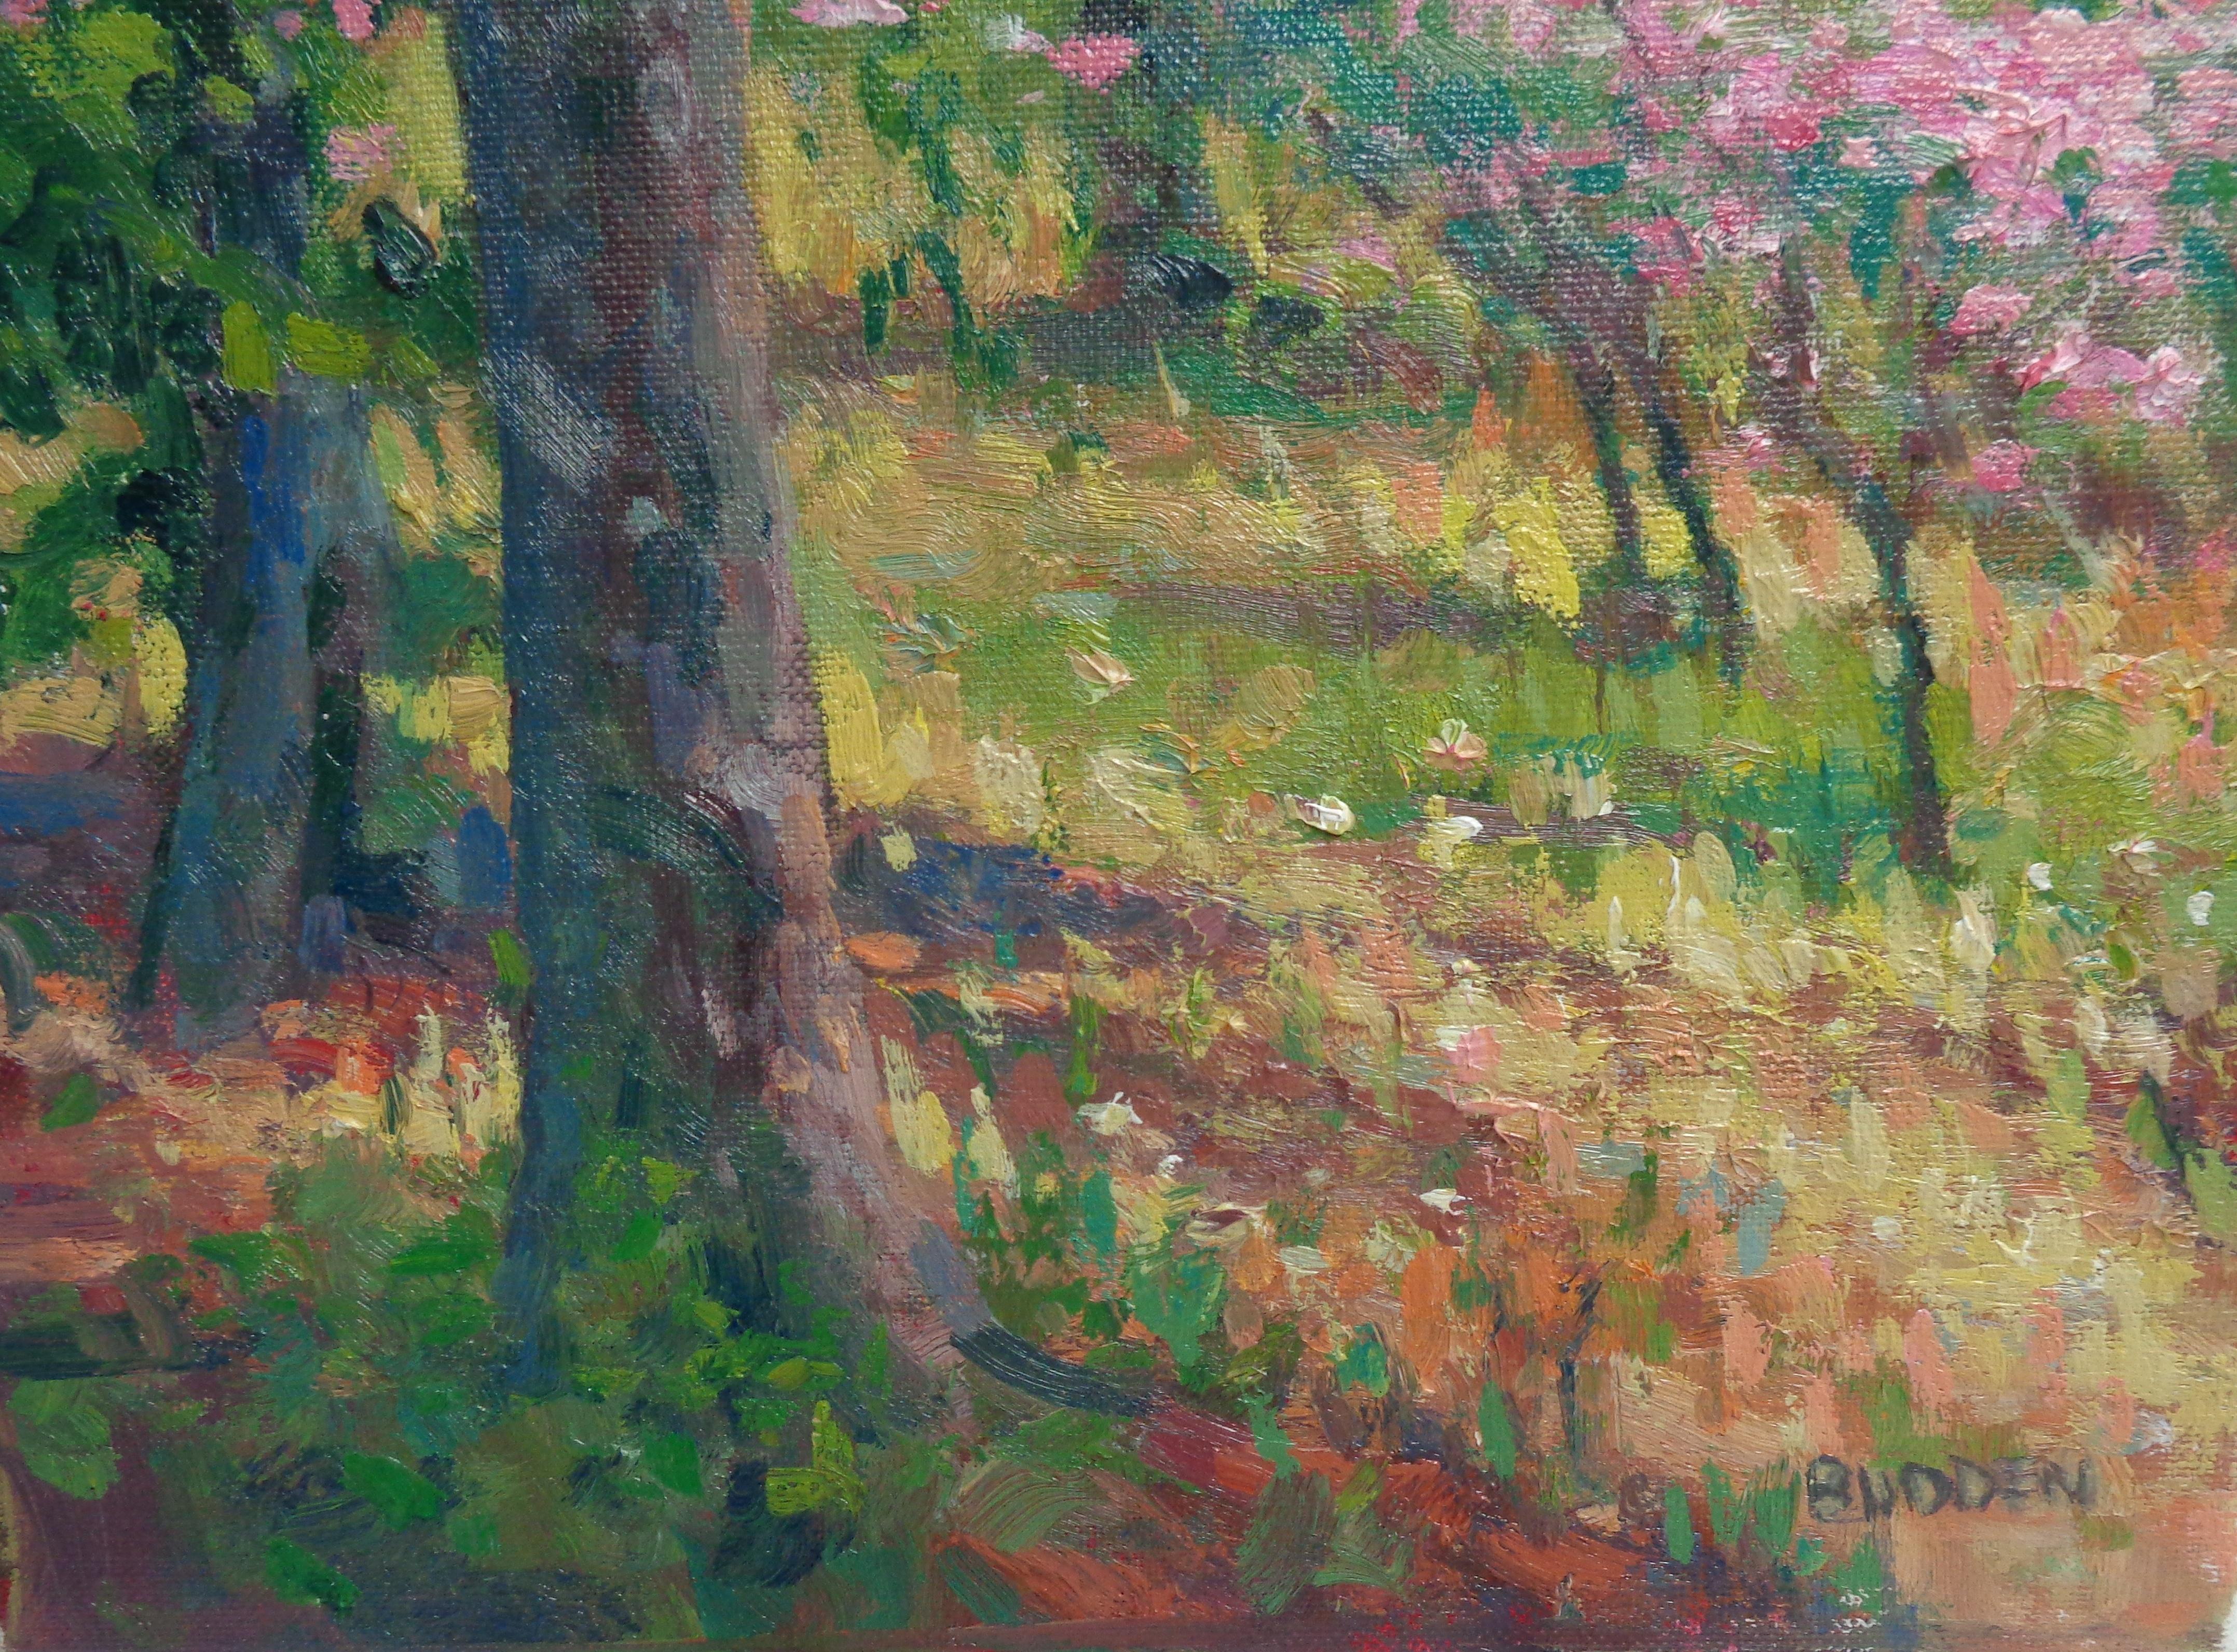  Impressionistic Floral Landscape Oil Painting by Michael Budden Early Spring For Sale 3